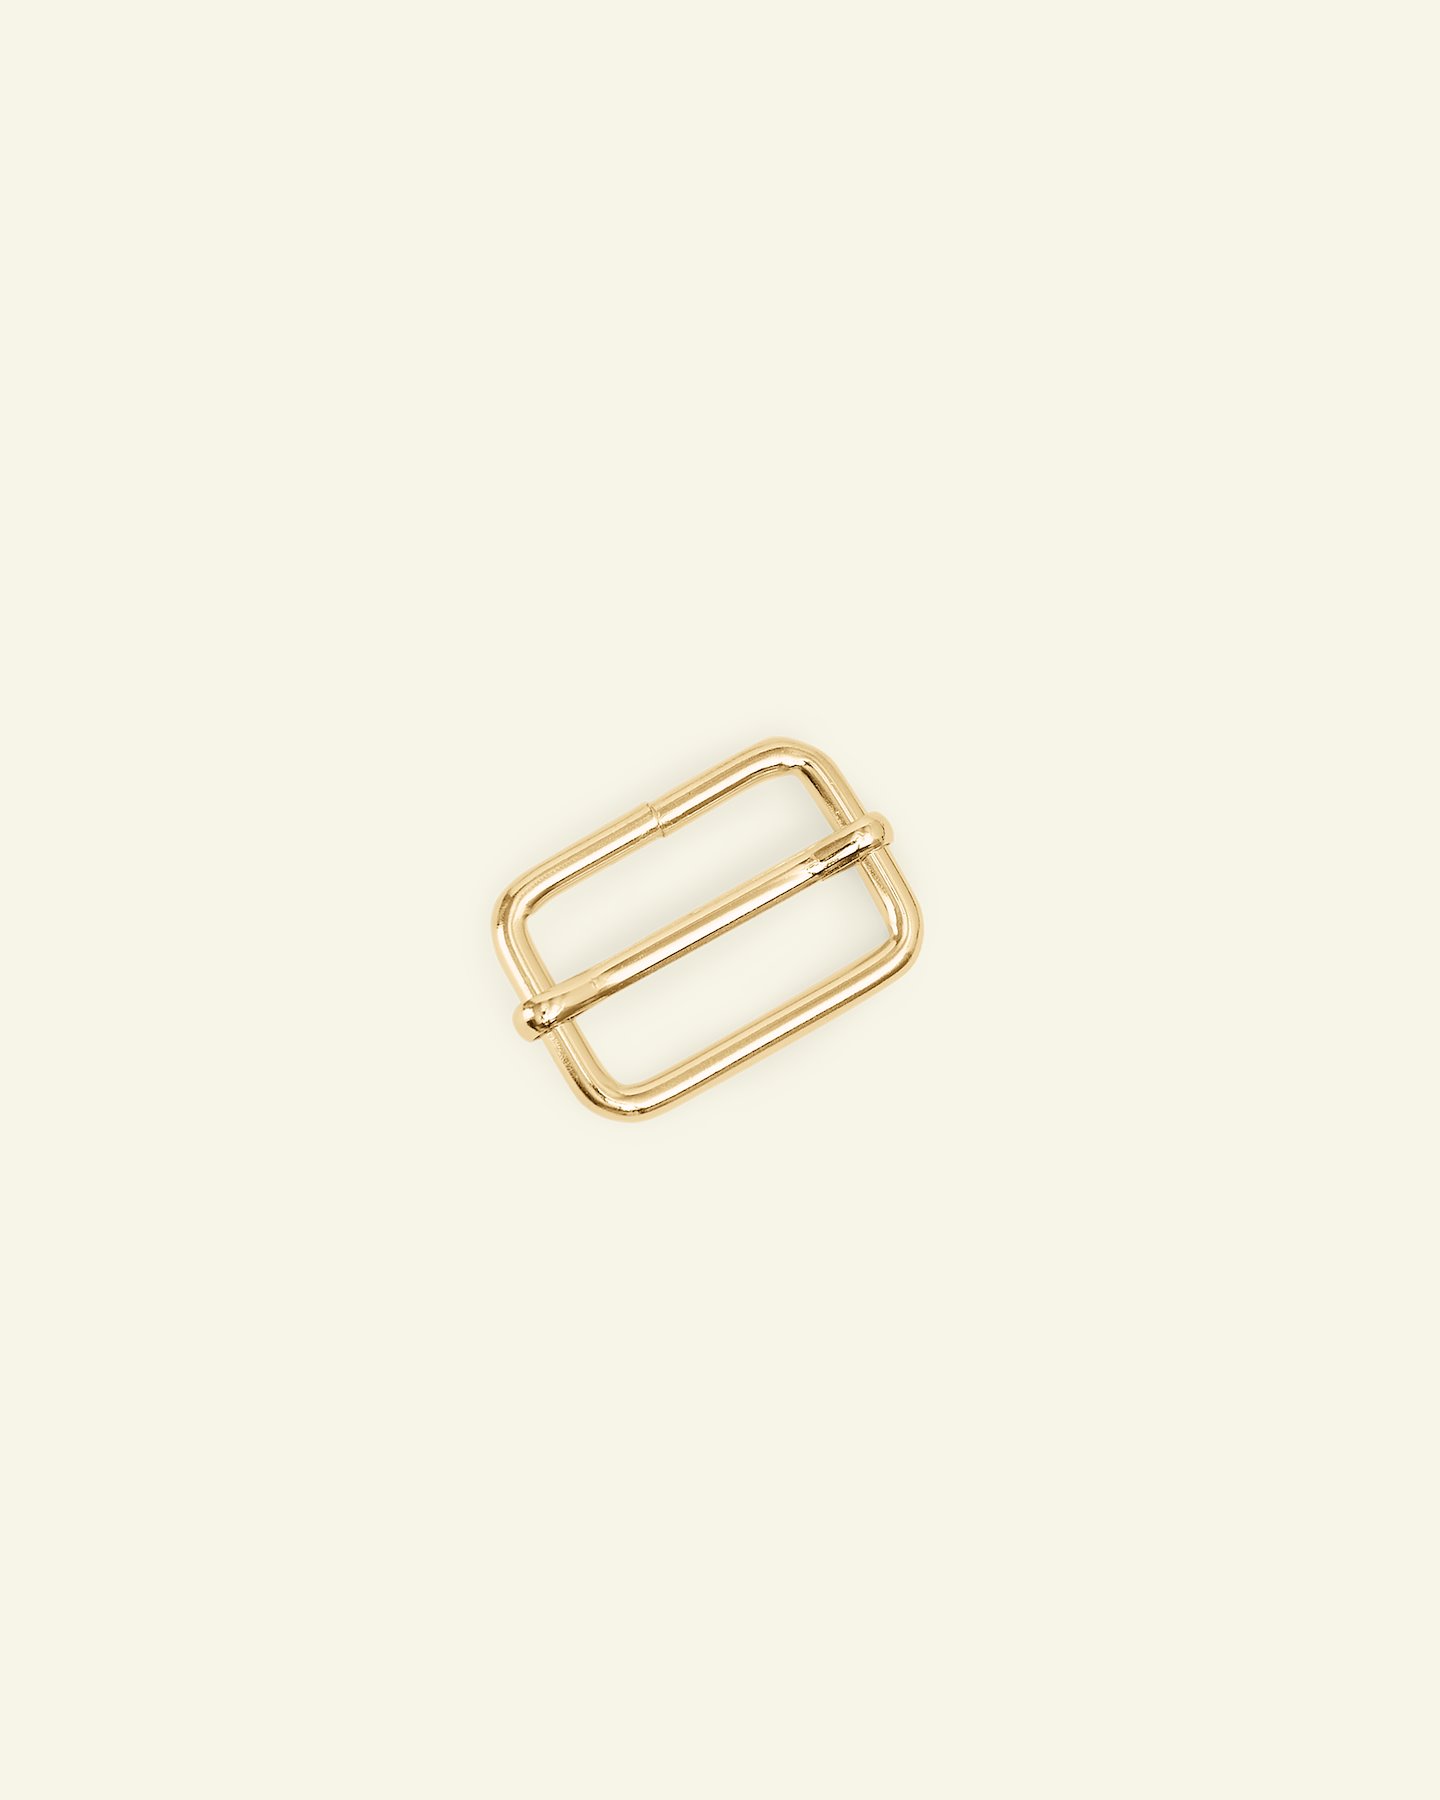 Buckle metal adjust 32x20mm gold col 1pc 45514_pack